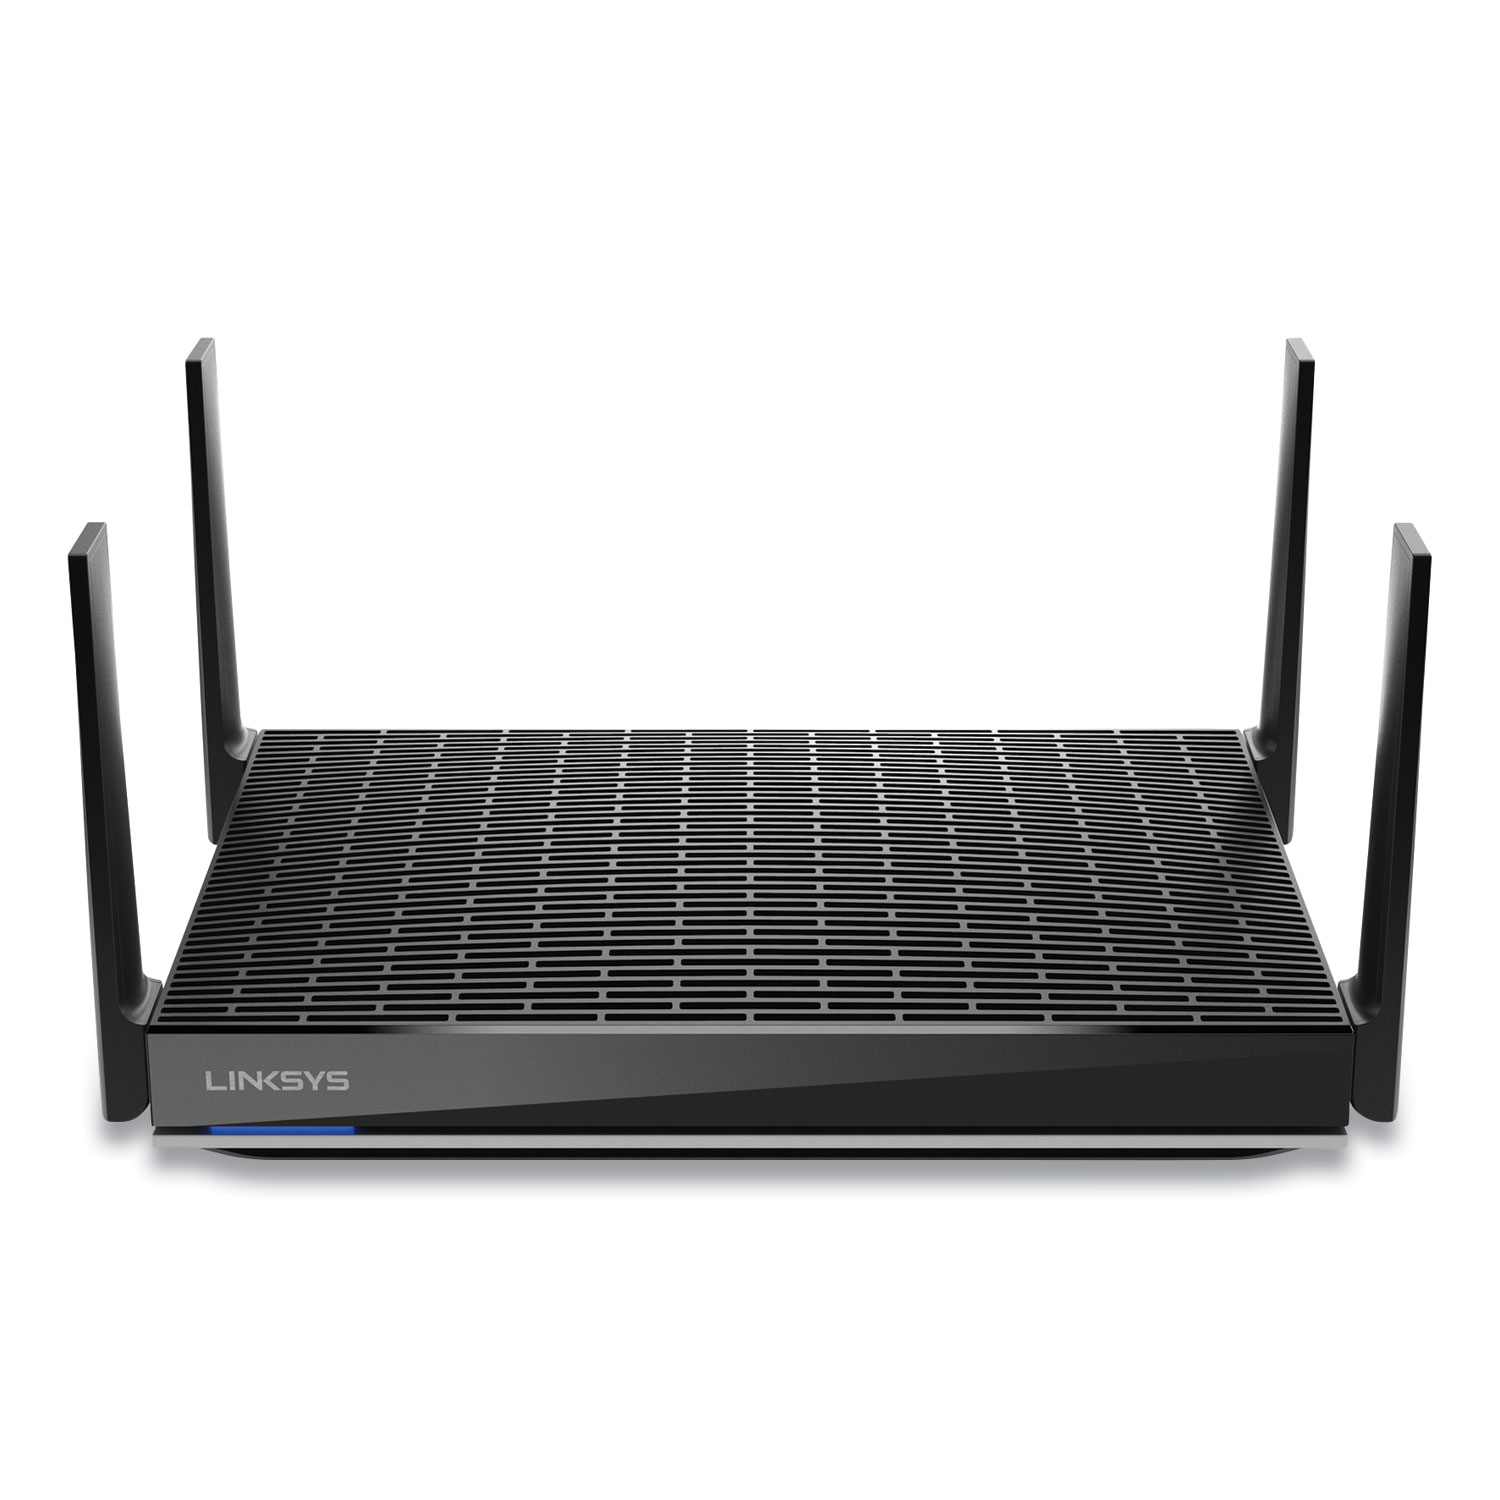  LINKSYS MR9600 MR9600 Dual-Band Mesh Router, 5 Ports, 2.4 GHz/5 GHz (LNKMR9600) 